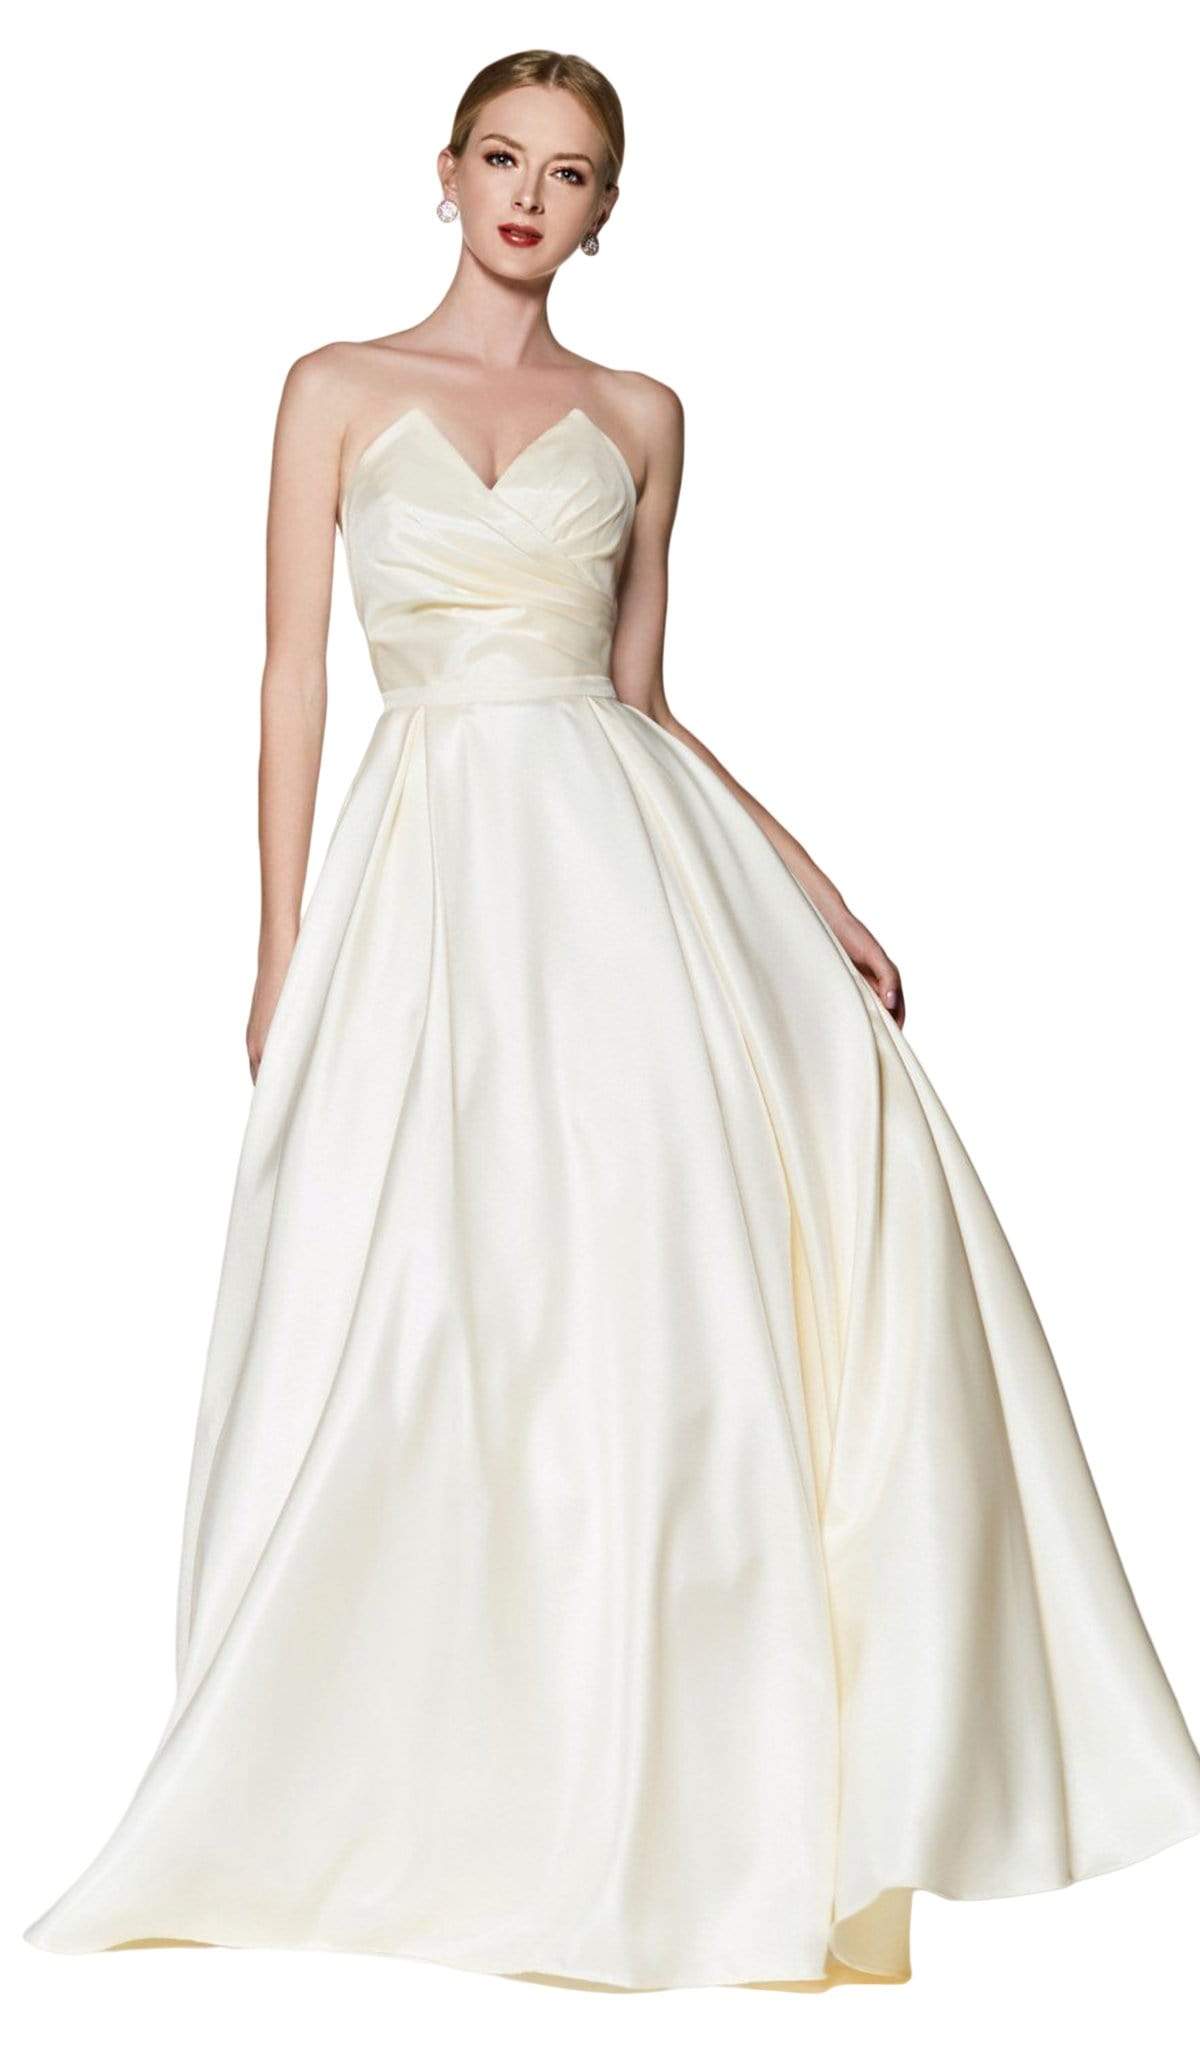 Cinderella Divine - UE008 Strapless Pointed Sweetheart Neck Backless Ballgown Special Occasion Dress 2 / Cream